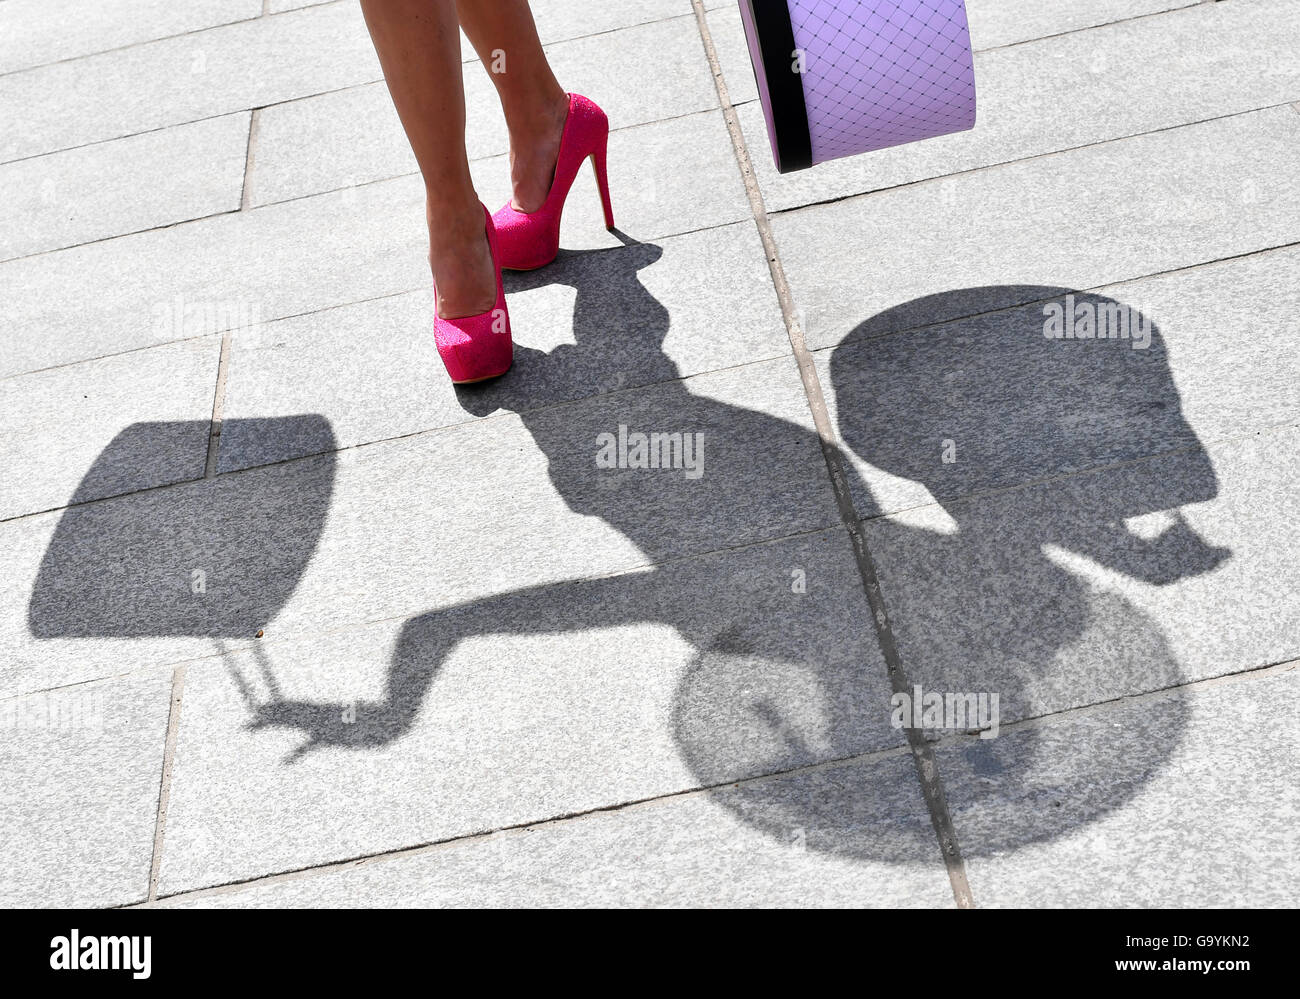 The silhouette of Princess Maja von Hohenzollern, holding hat boxes in her hands, appears on the pavement during a phtoo shoot in Berlin, Germany, 4 July 2016. Photo: Jens Kalaene/dpa Stock Photo